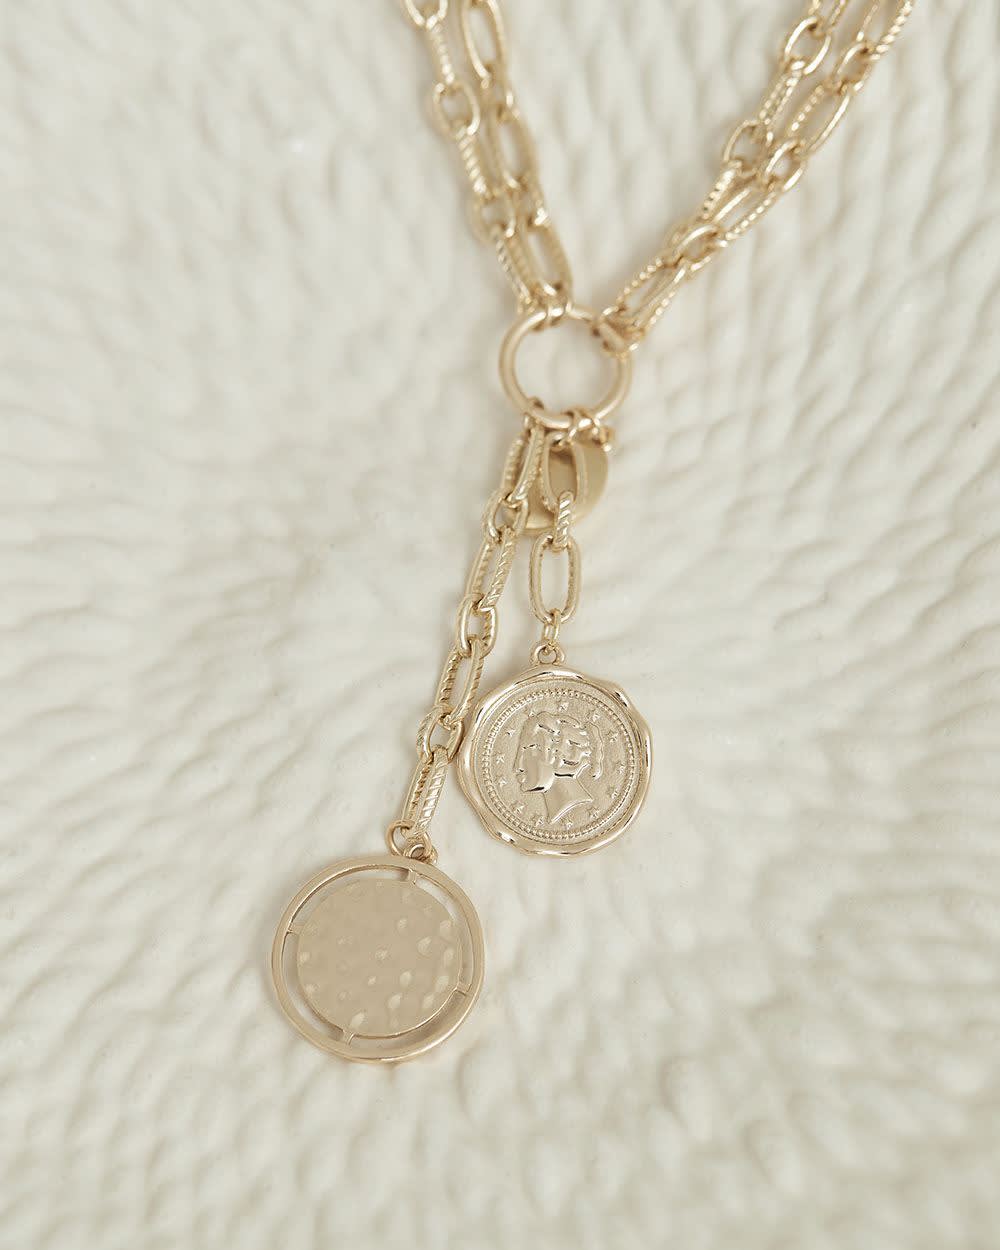 Golden Chain with Dollar Pendant | RW&CO.